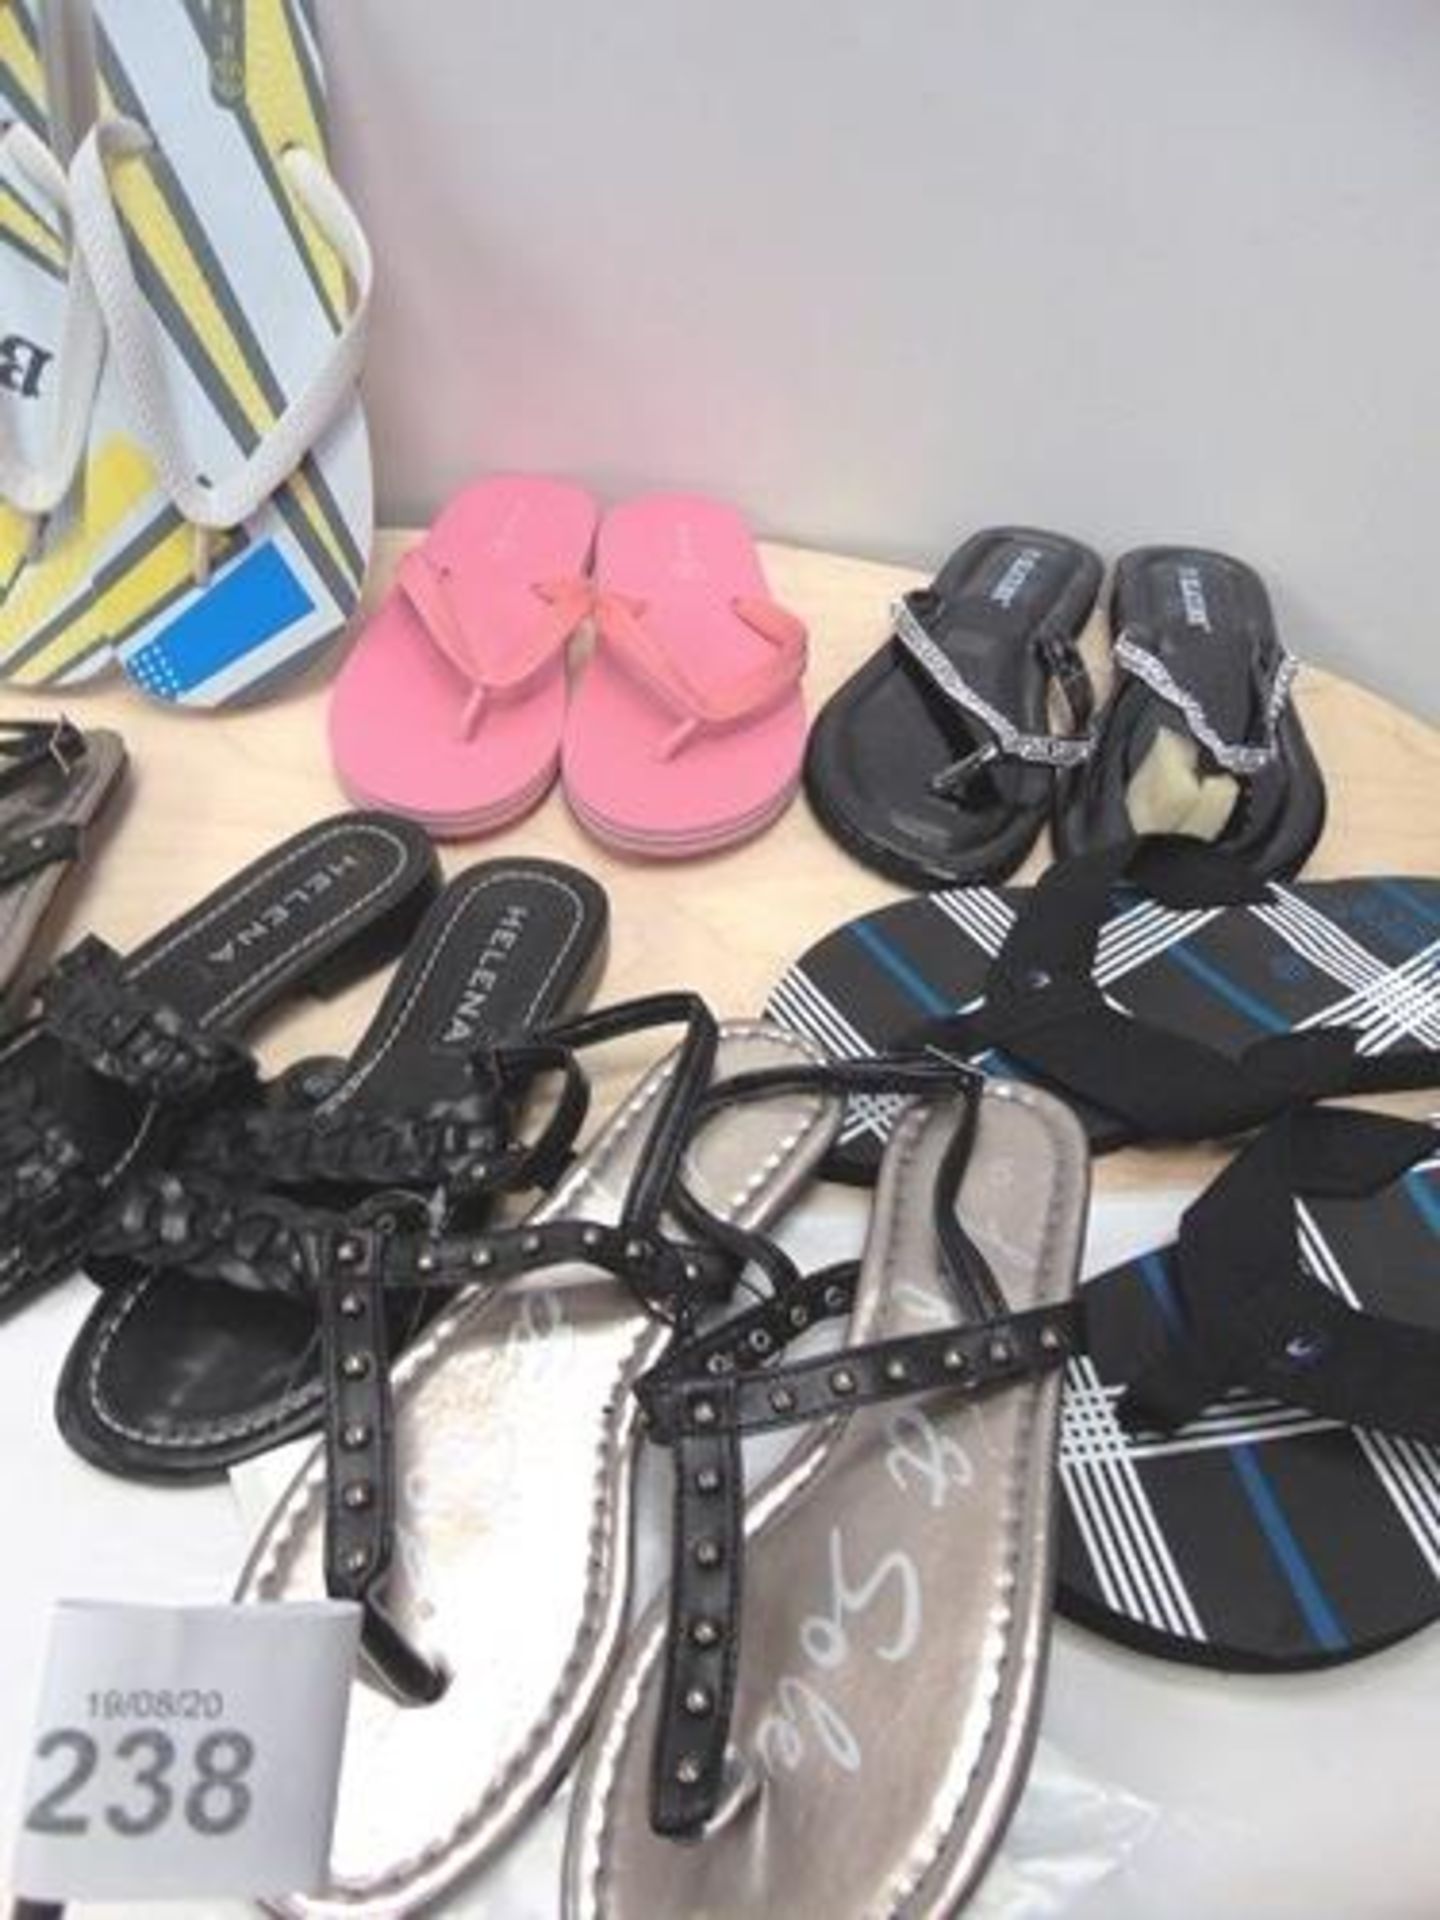 Approximately 30 x assorted pairs of men's, women's and children's footwear including flip-flops, - Image 3 of 4